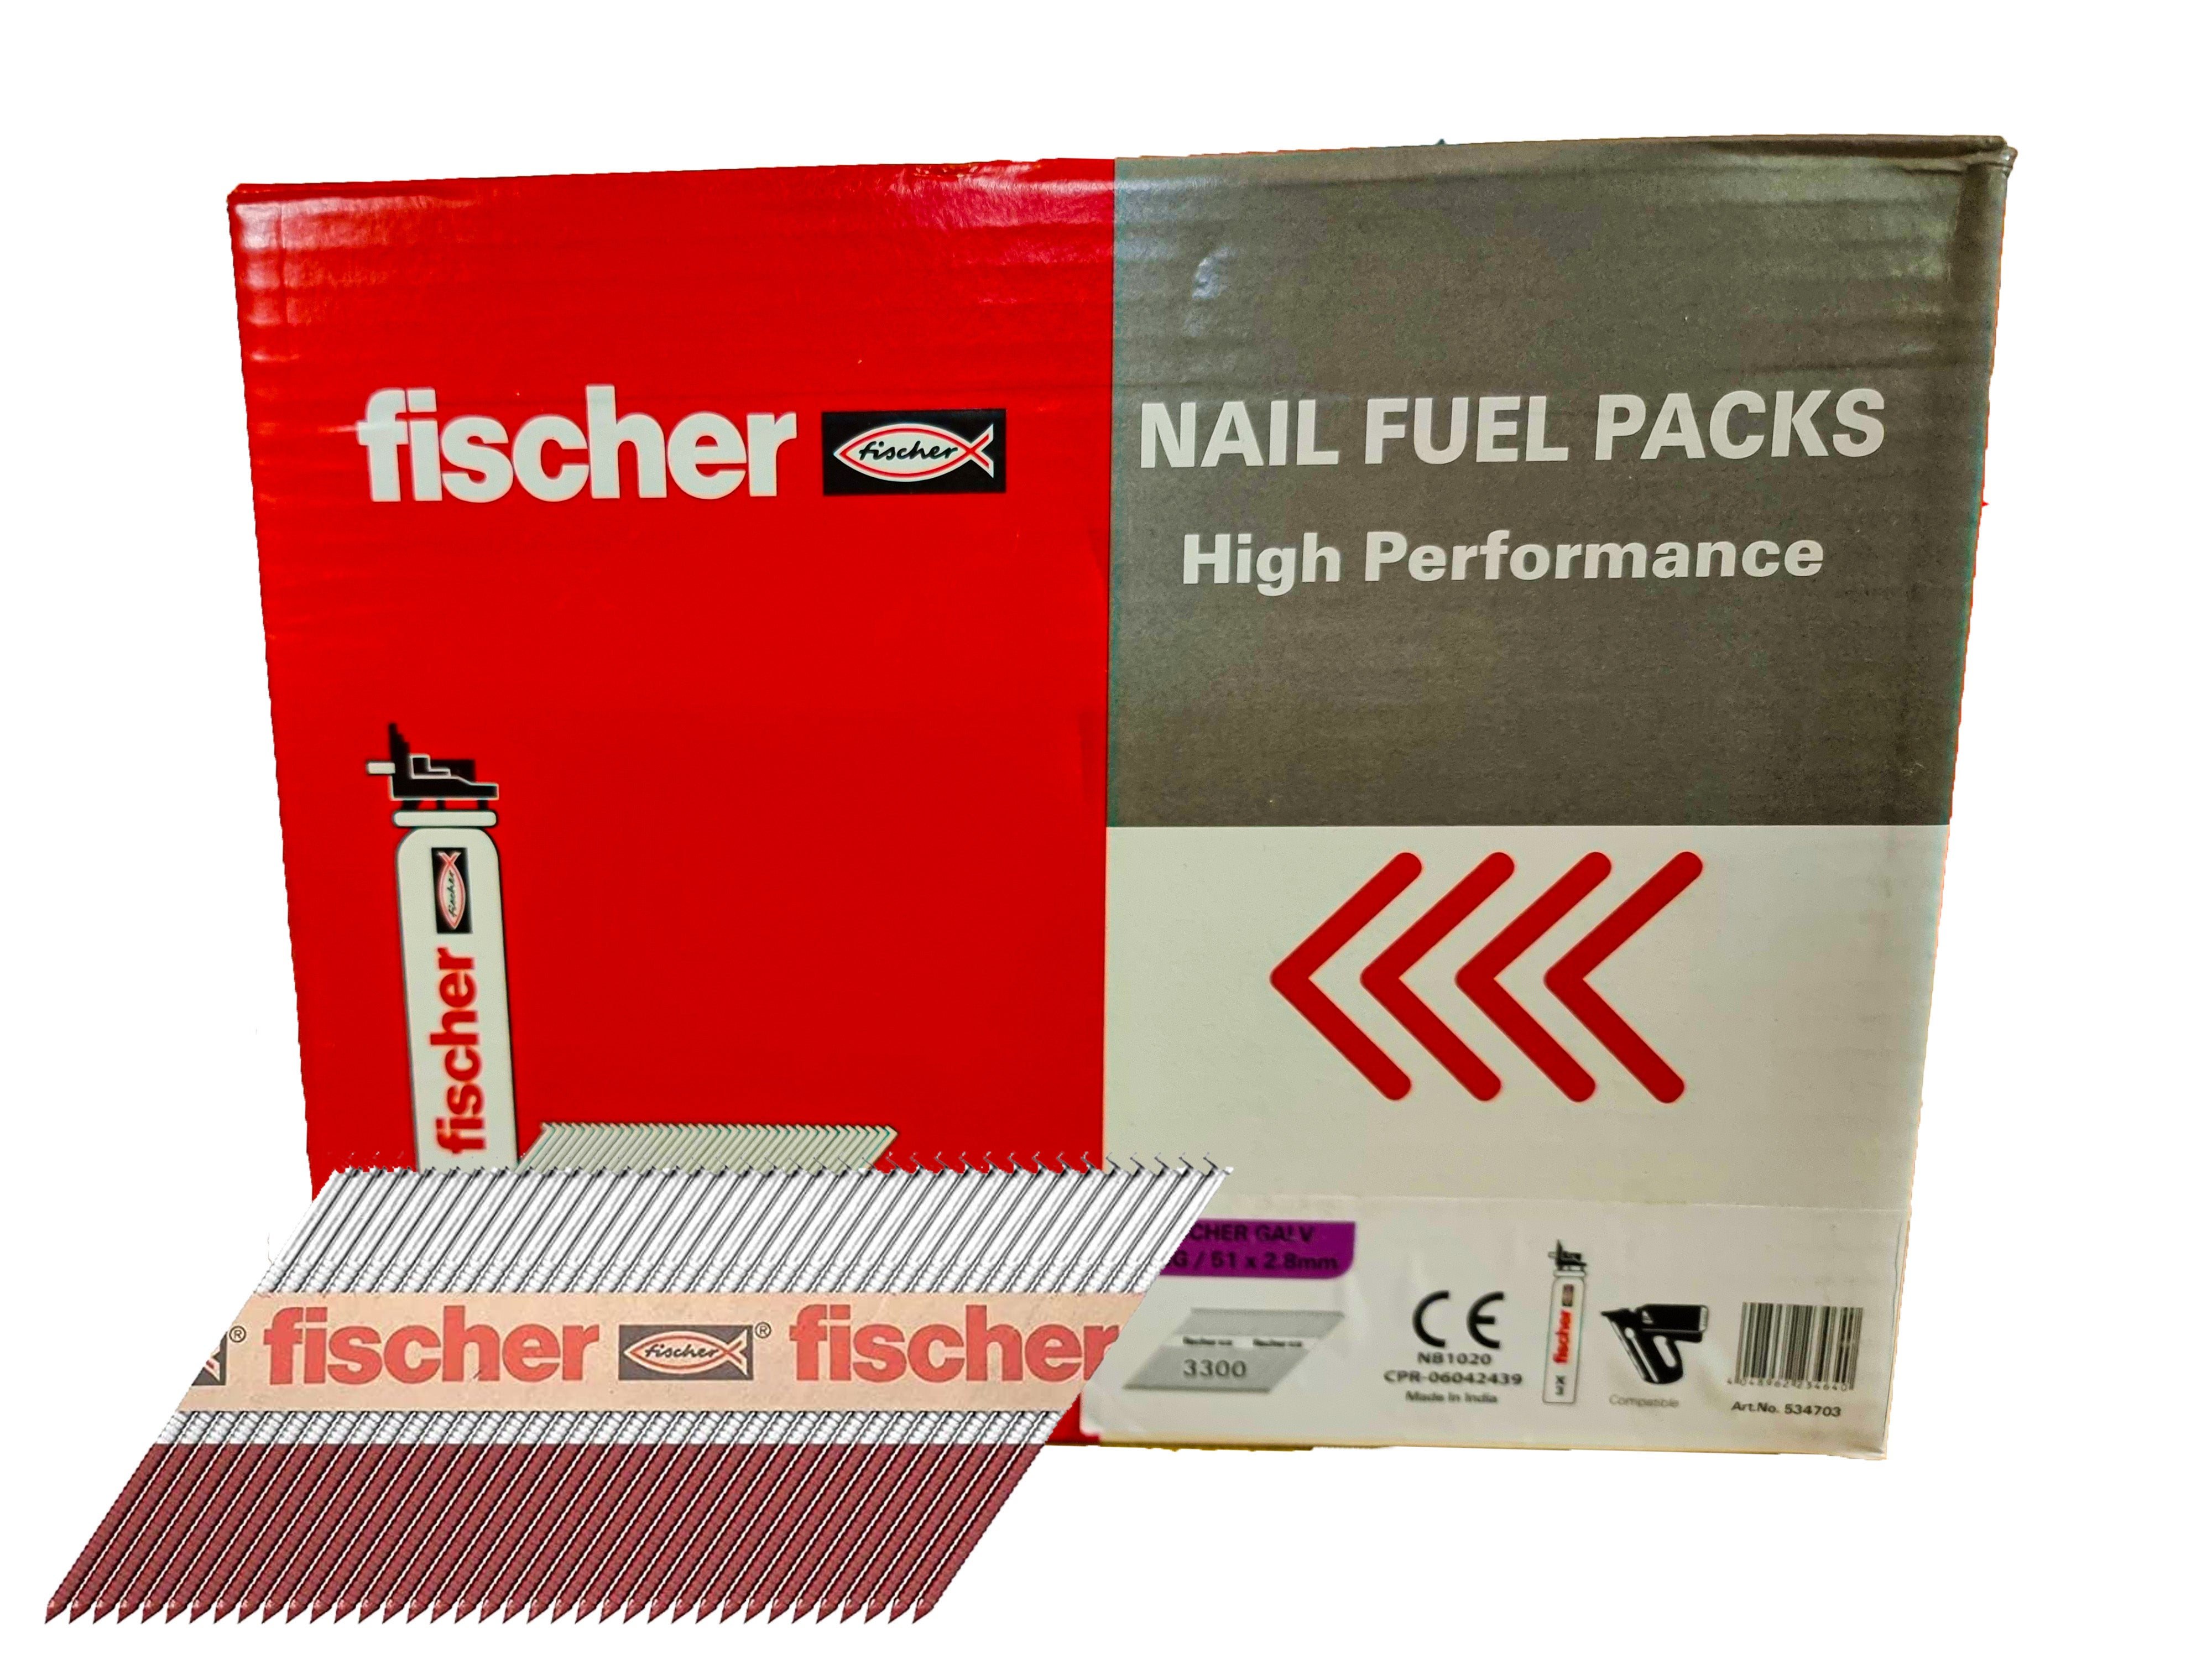 Fischer Nail Fuel Pack 3.1 x 90 Smooth Galv (Box 2200) Main Image